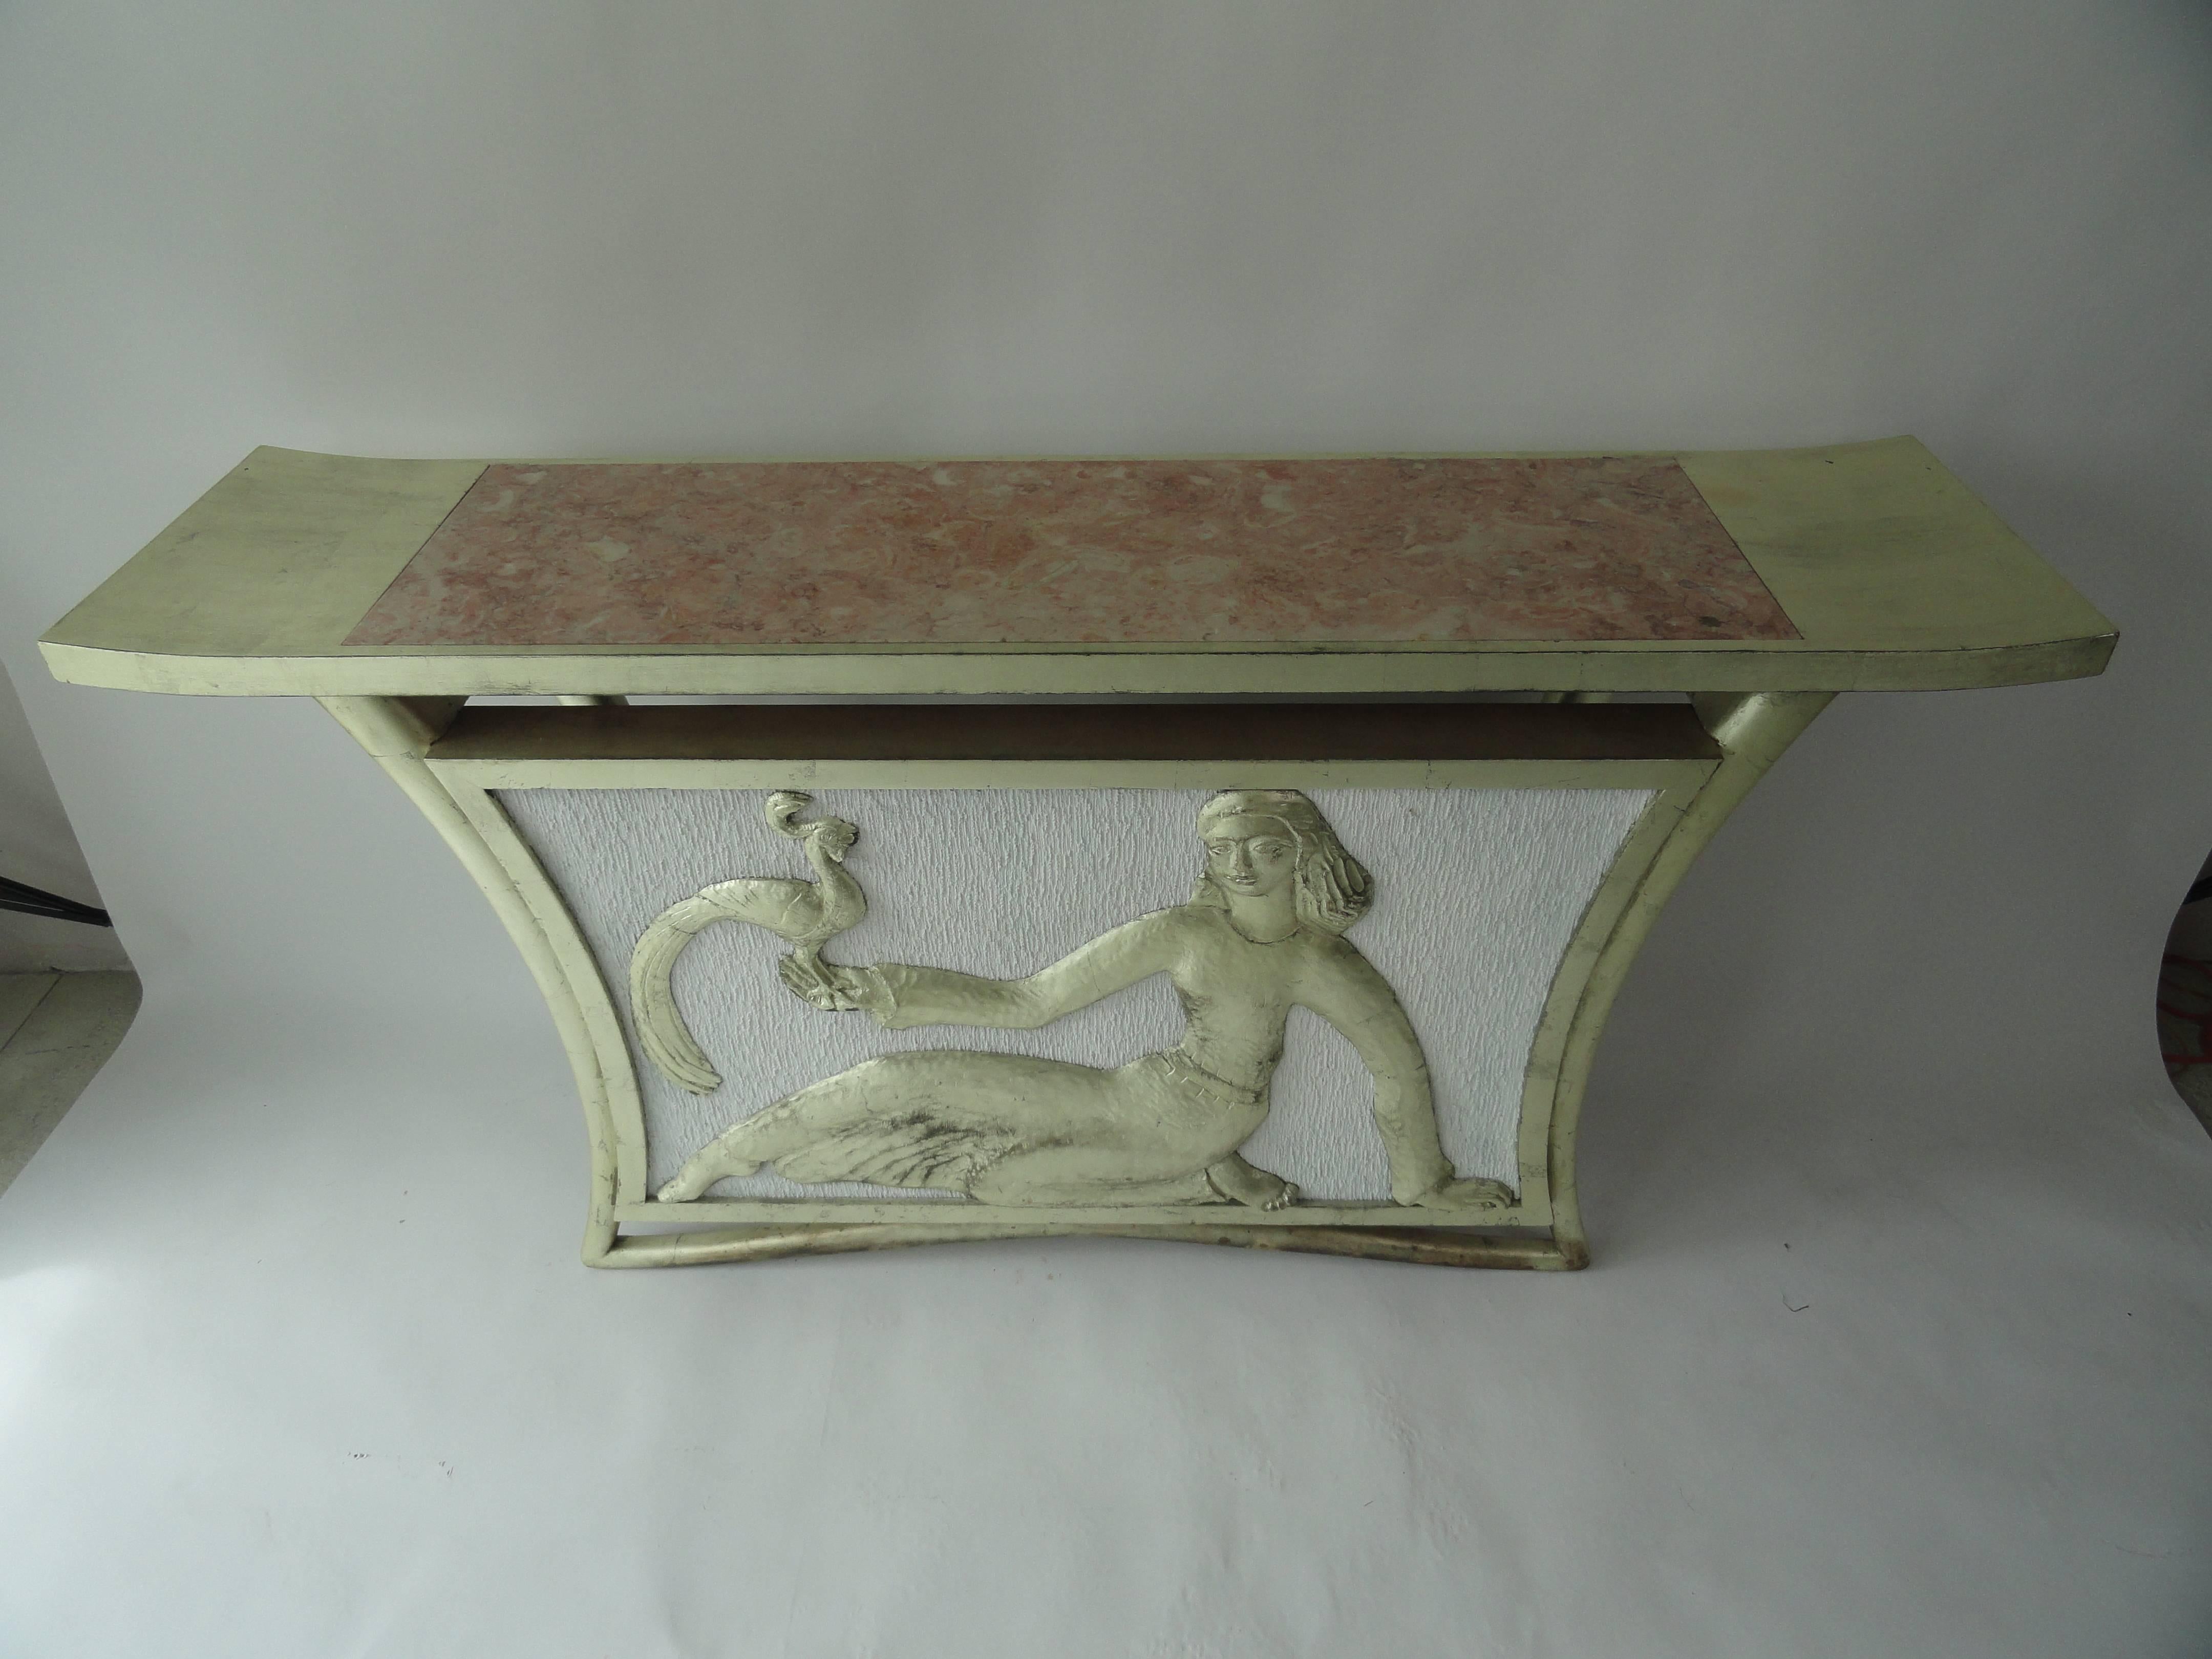 Custom T.H. Robsjohn-Gibbings table with marble inset top. Carved female figure, Lydia, with peacock. Newer silver leaf finish on frame. White painted fabric background. Table came from a Palm Beach estate.